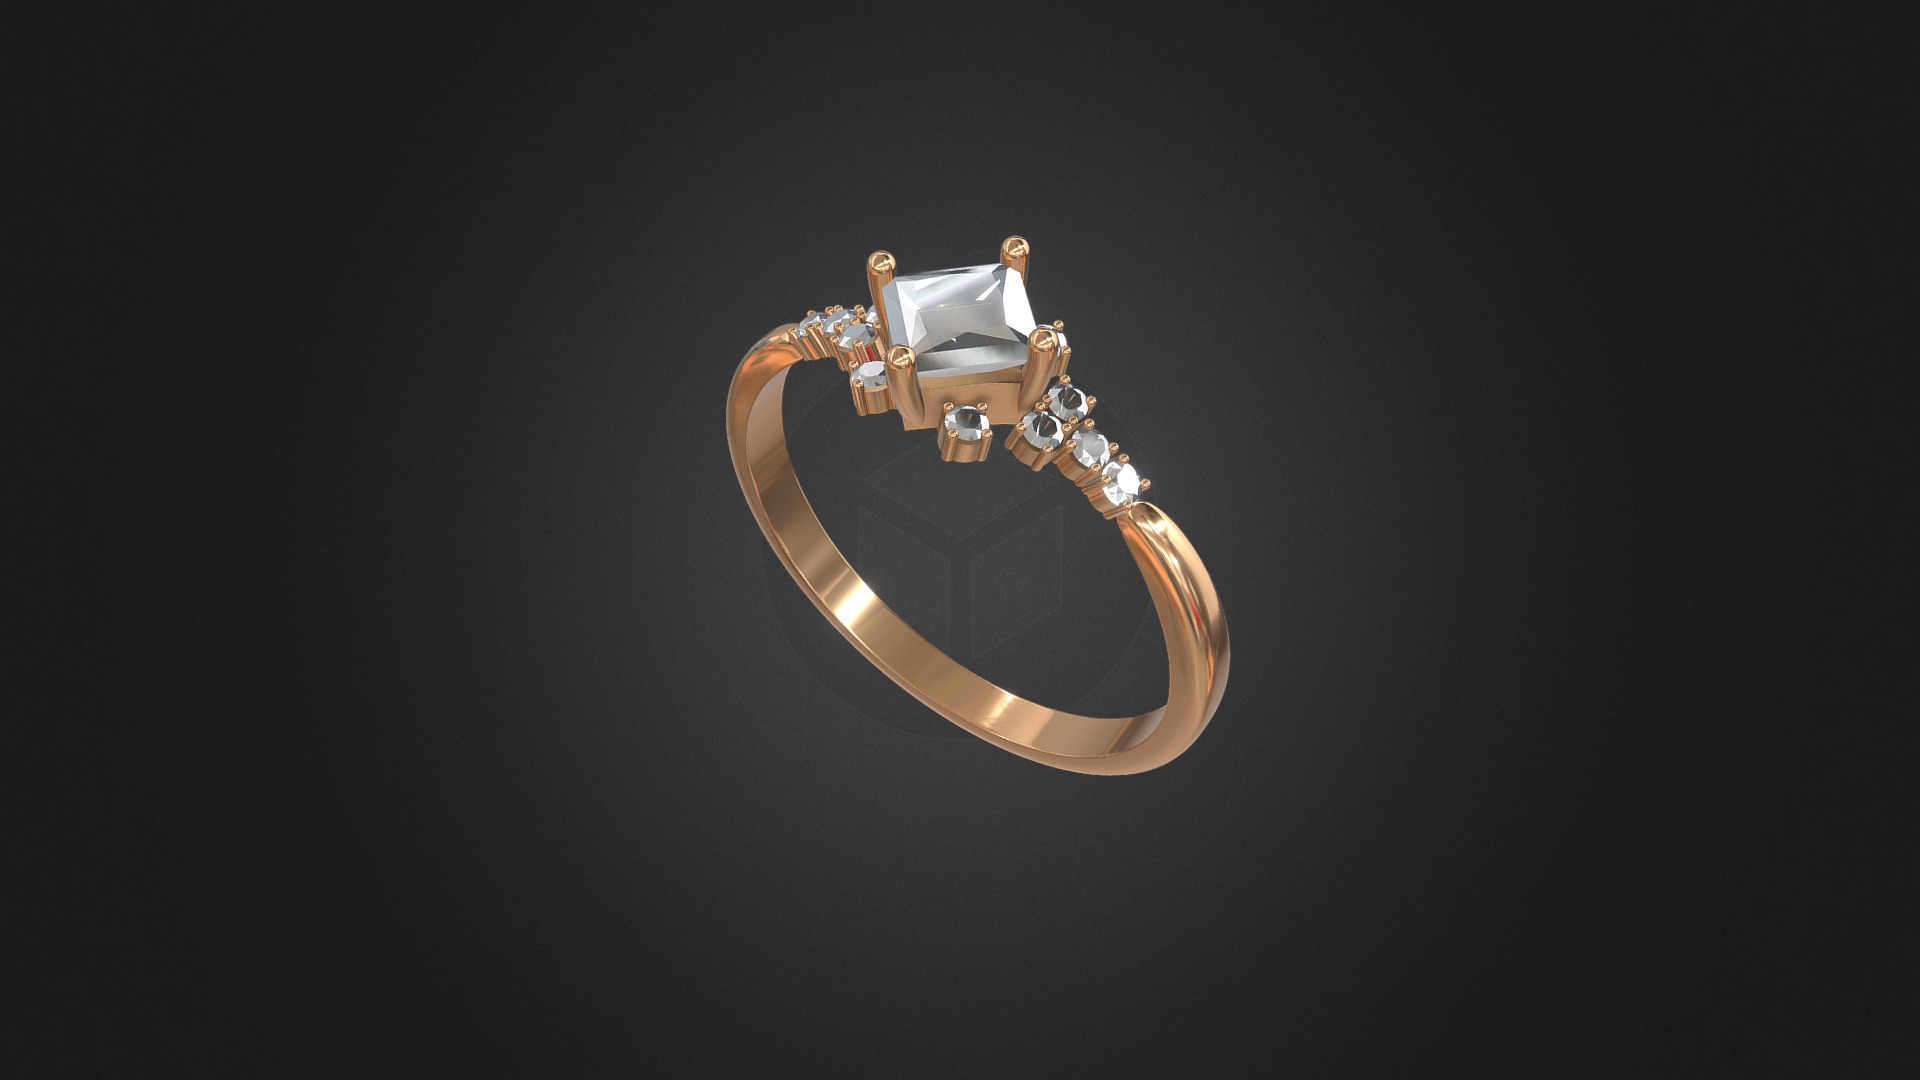 3D model 1025 – Ring - This is a 3D model of the 1025 - Ring. The 3D model is about a gold ring with a diamond.